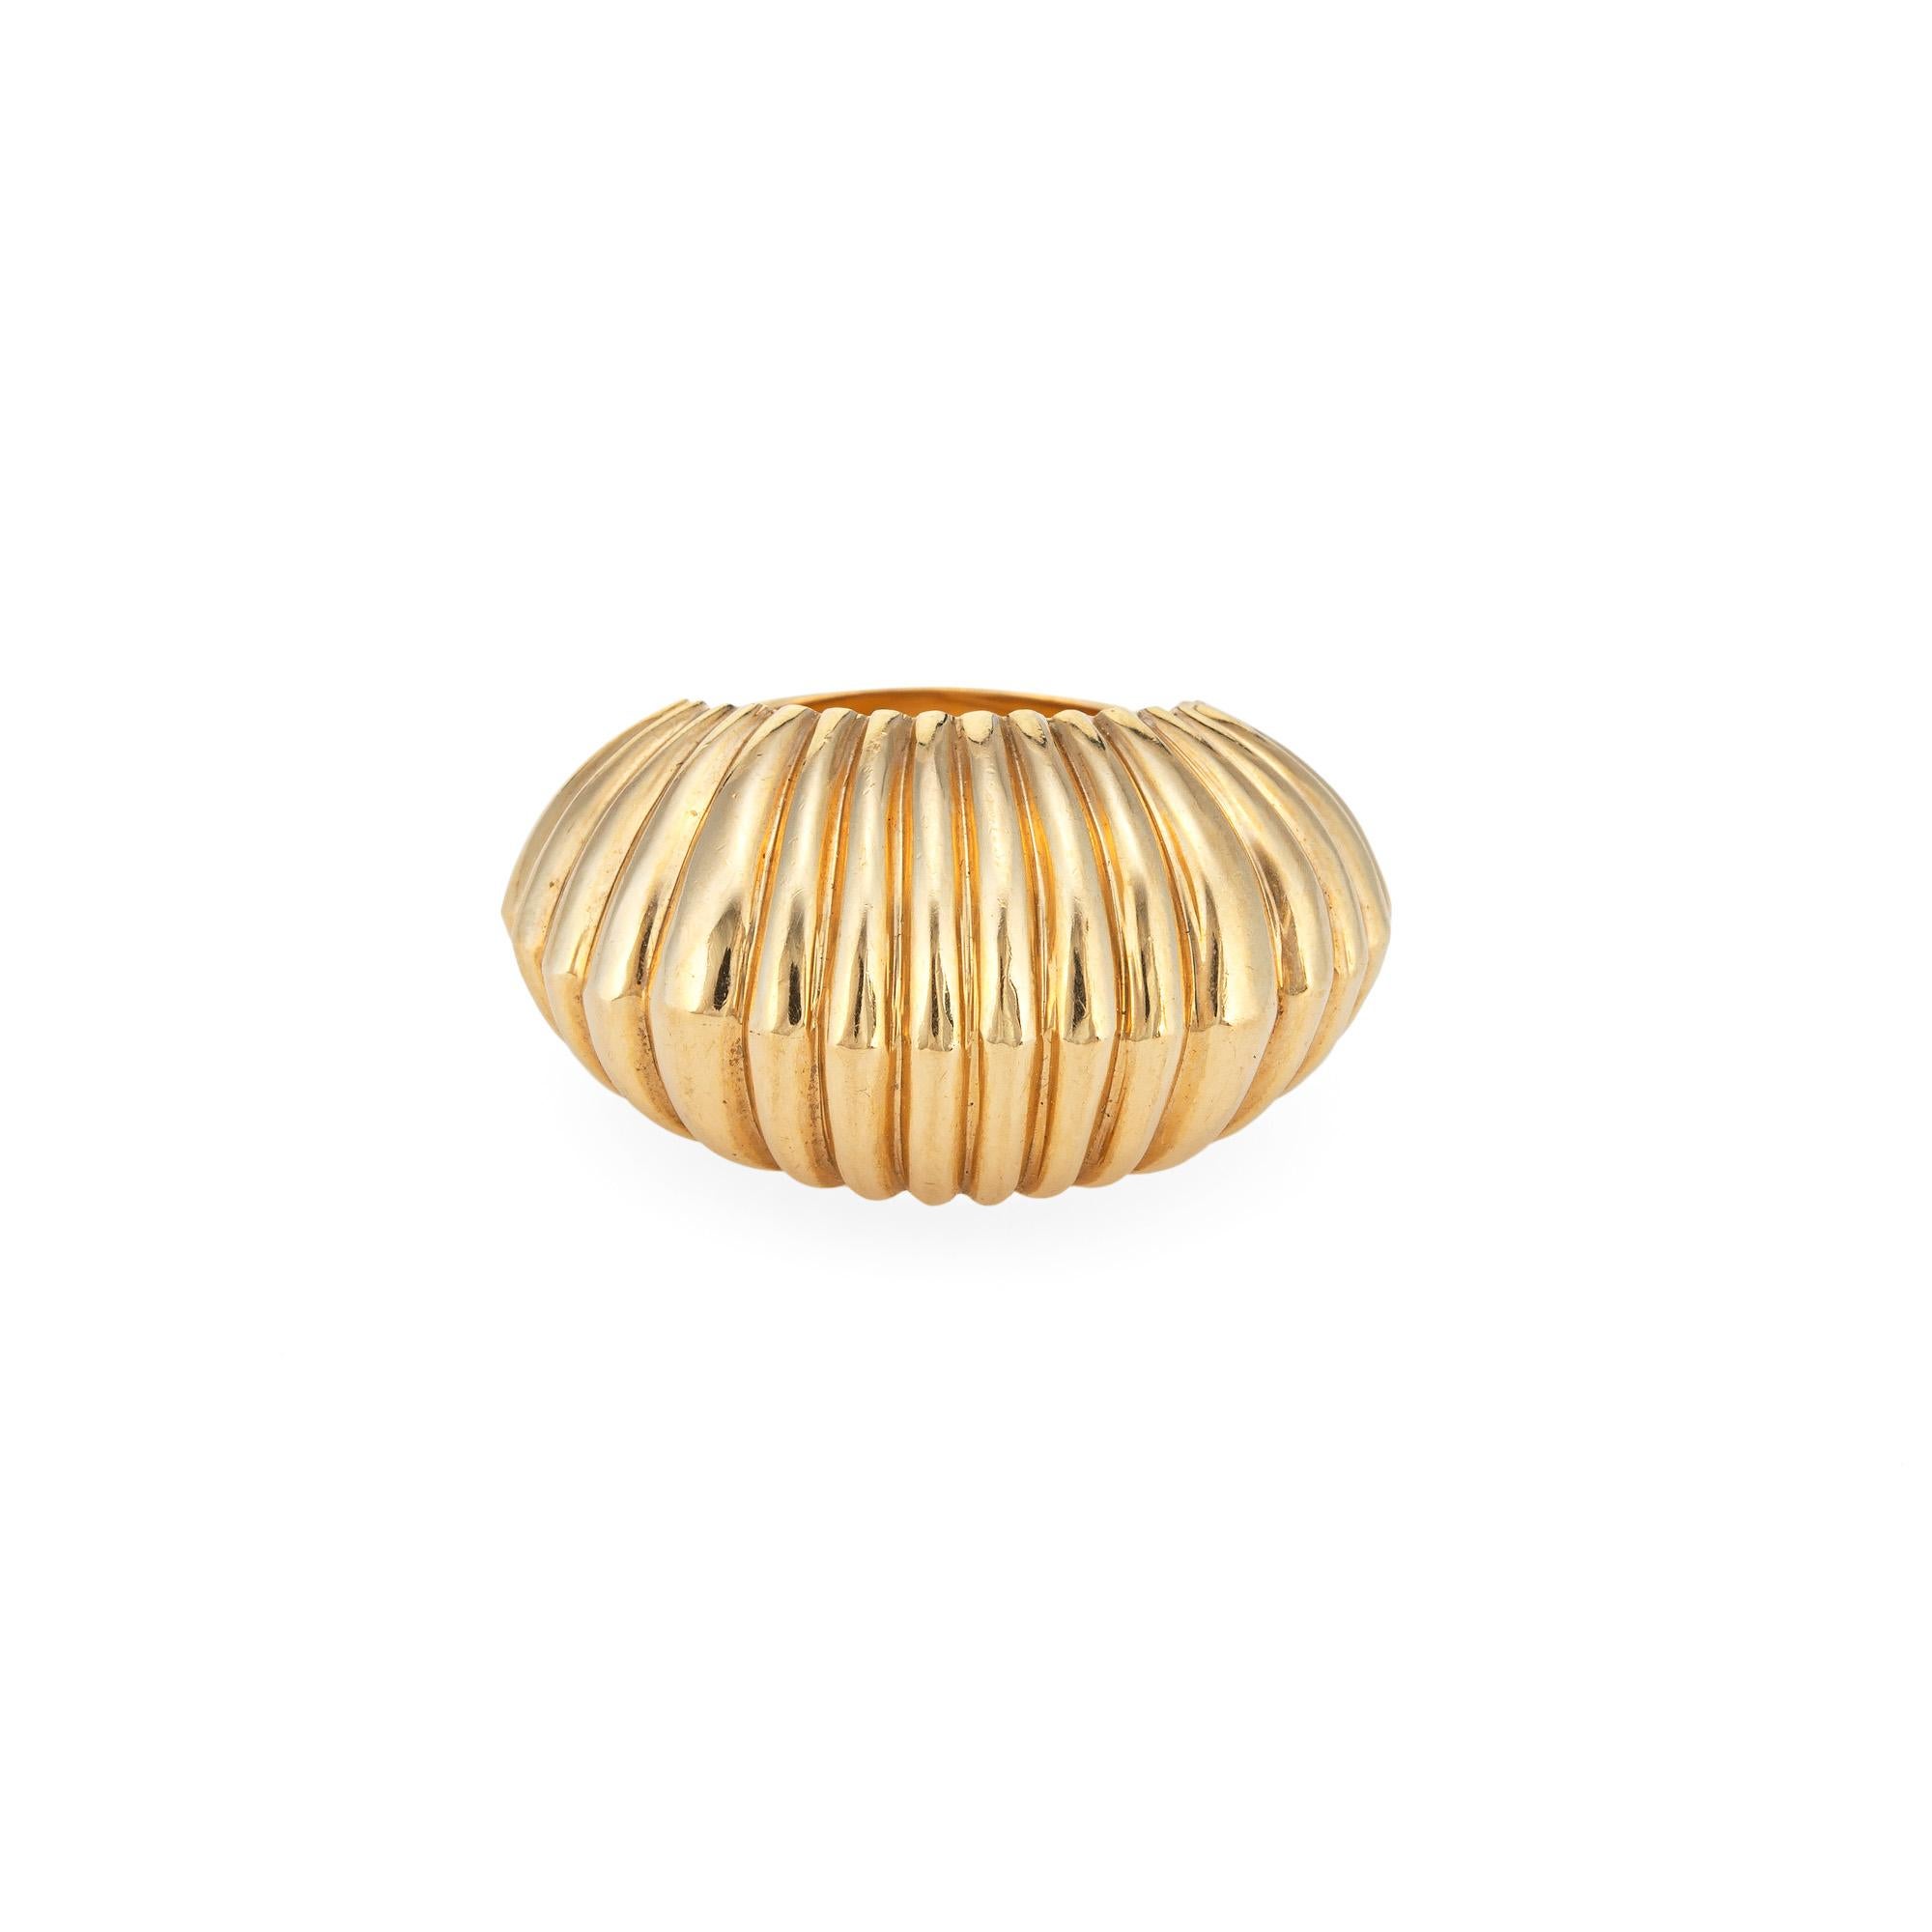 Finely detailed vintage Cartier bombe cocktail ring (circa 1945) crafted in 14 karat yellow gold. 

The stylish vintage ring features a fluted high dome in a textured shell motif. The whimsical design of the ring highlights the bold aesthetic of the